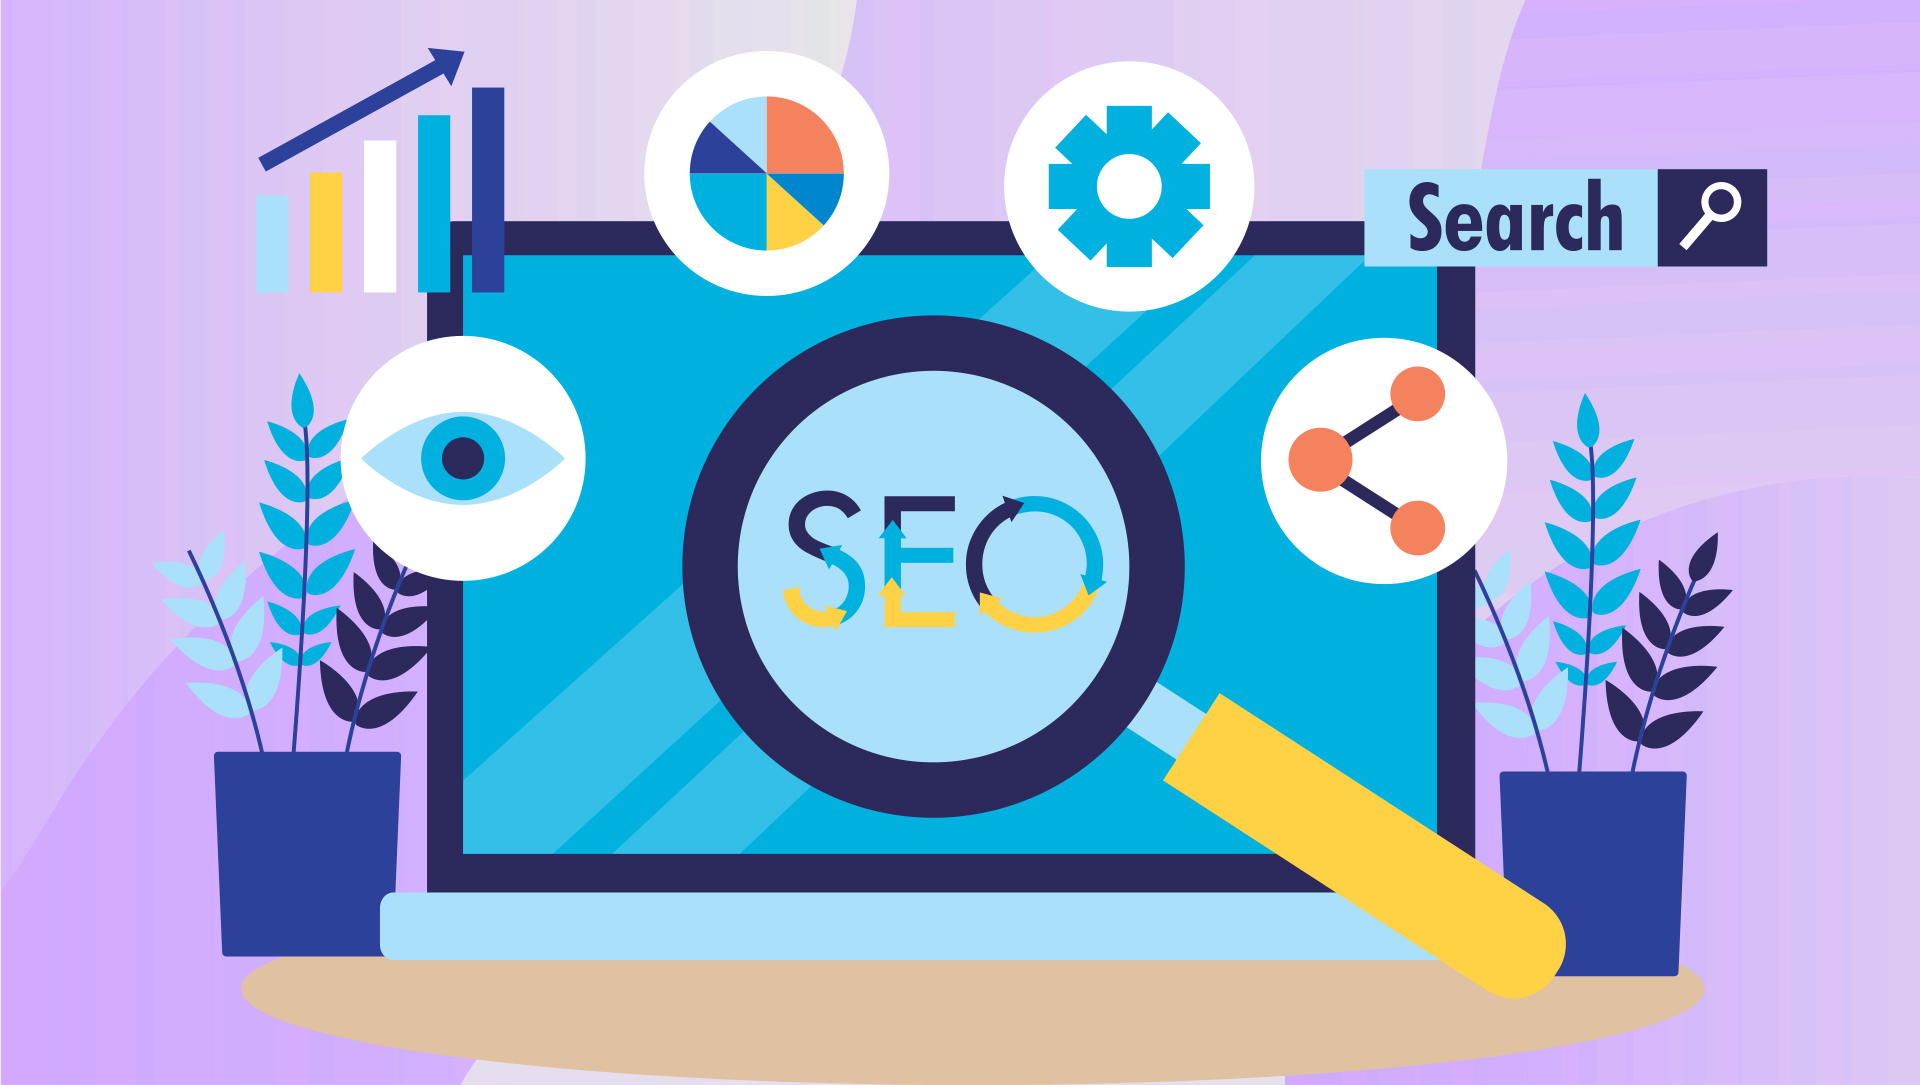 10-best-strategies-to-maximize-seo-roi-related-blog-20